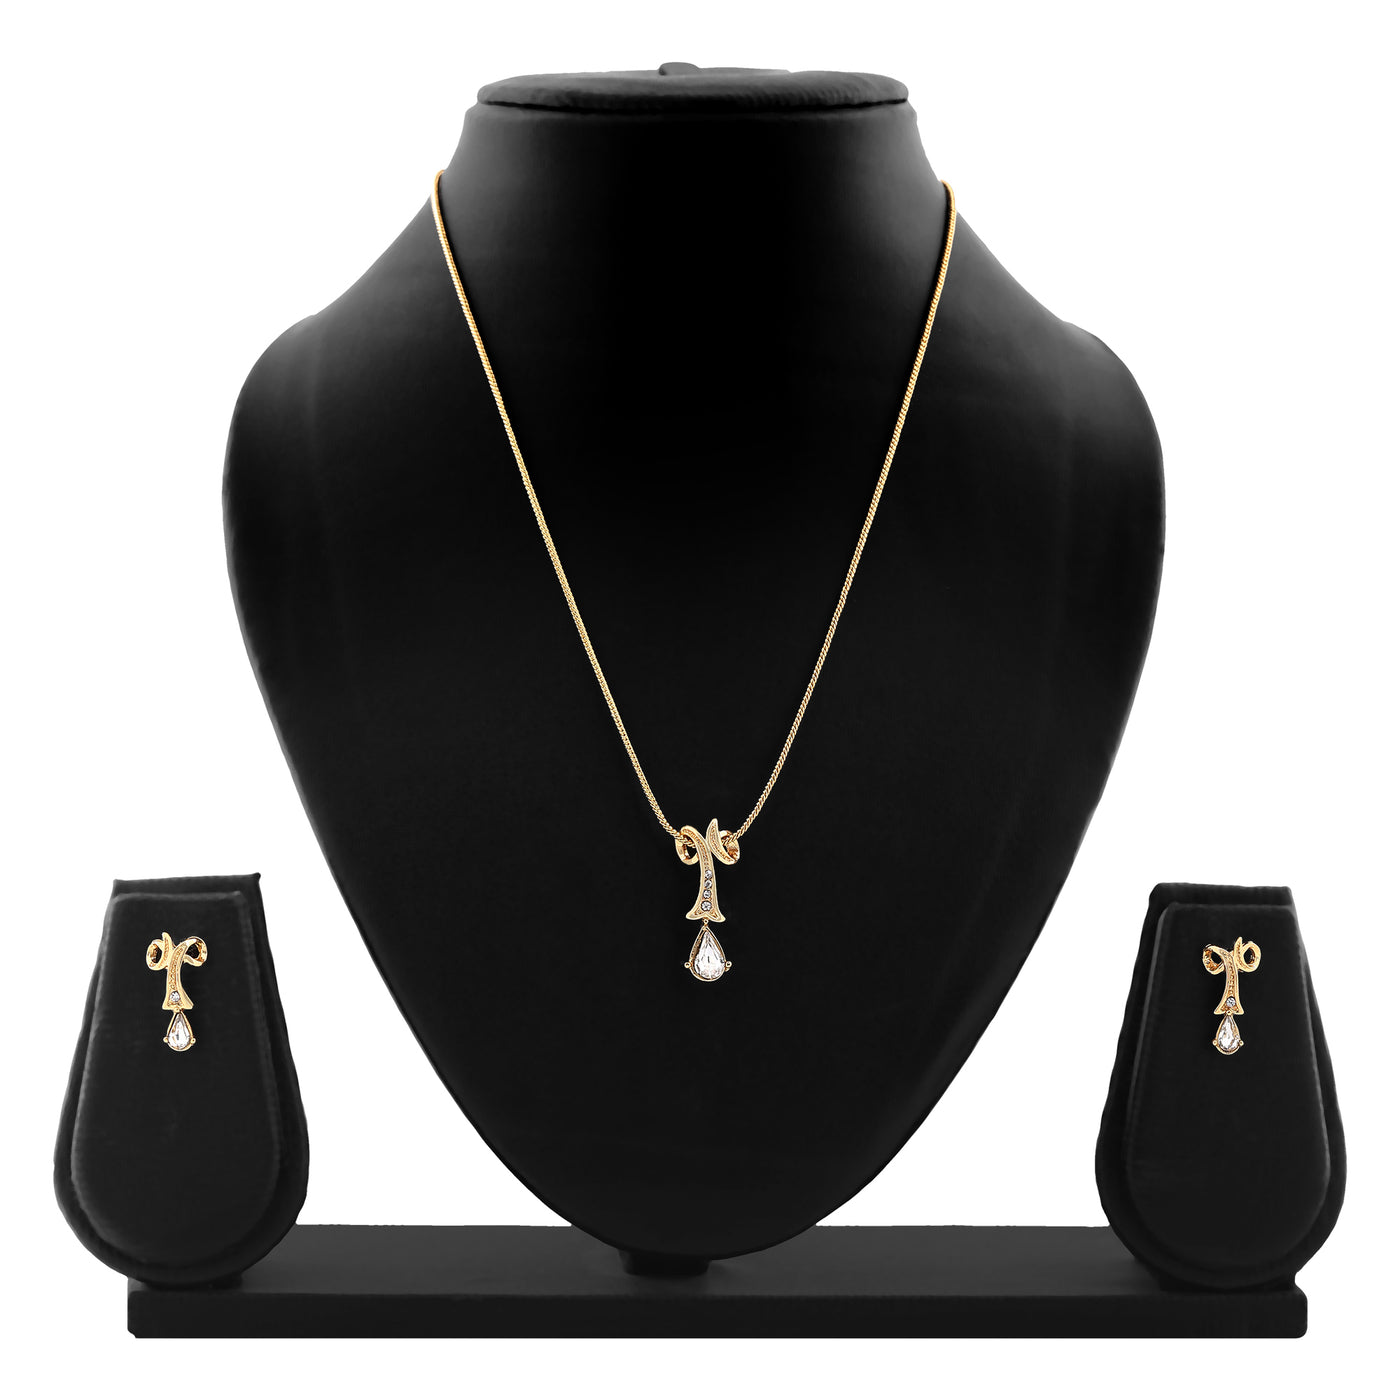 Estele 24 Kt Gold Plated Twisted Drop with Fancy Austrian Crystal Necklace Set for Women